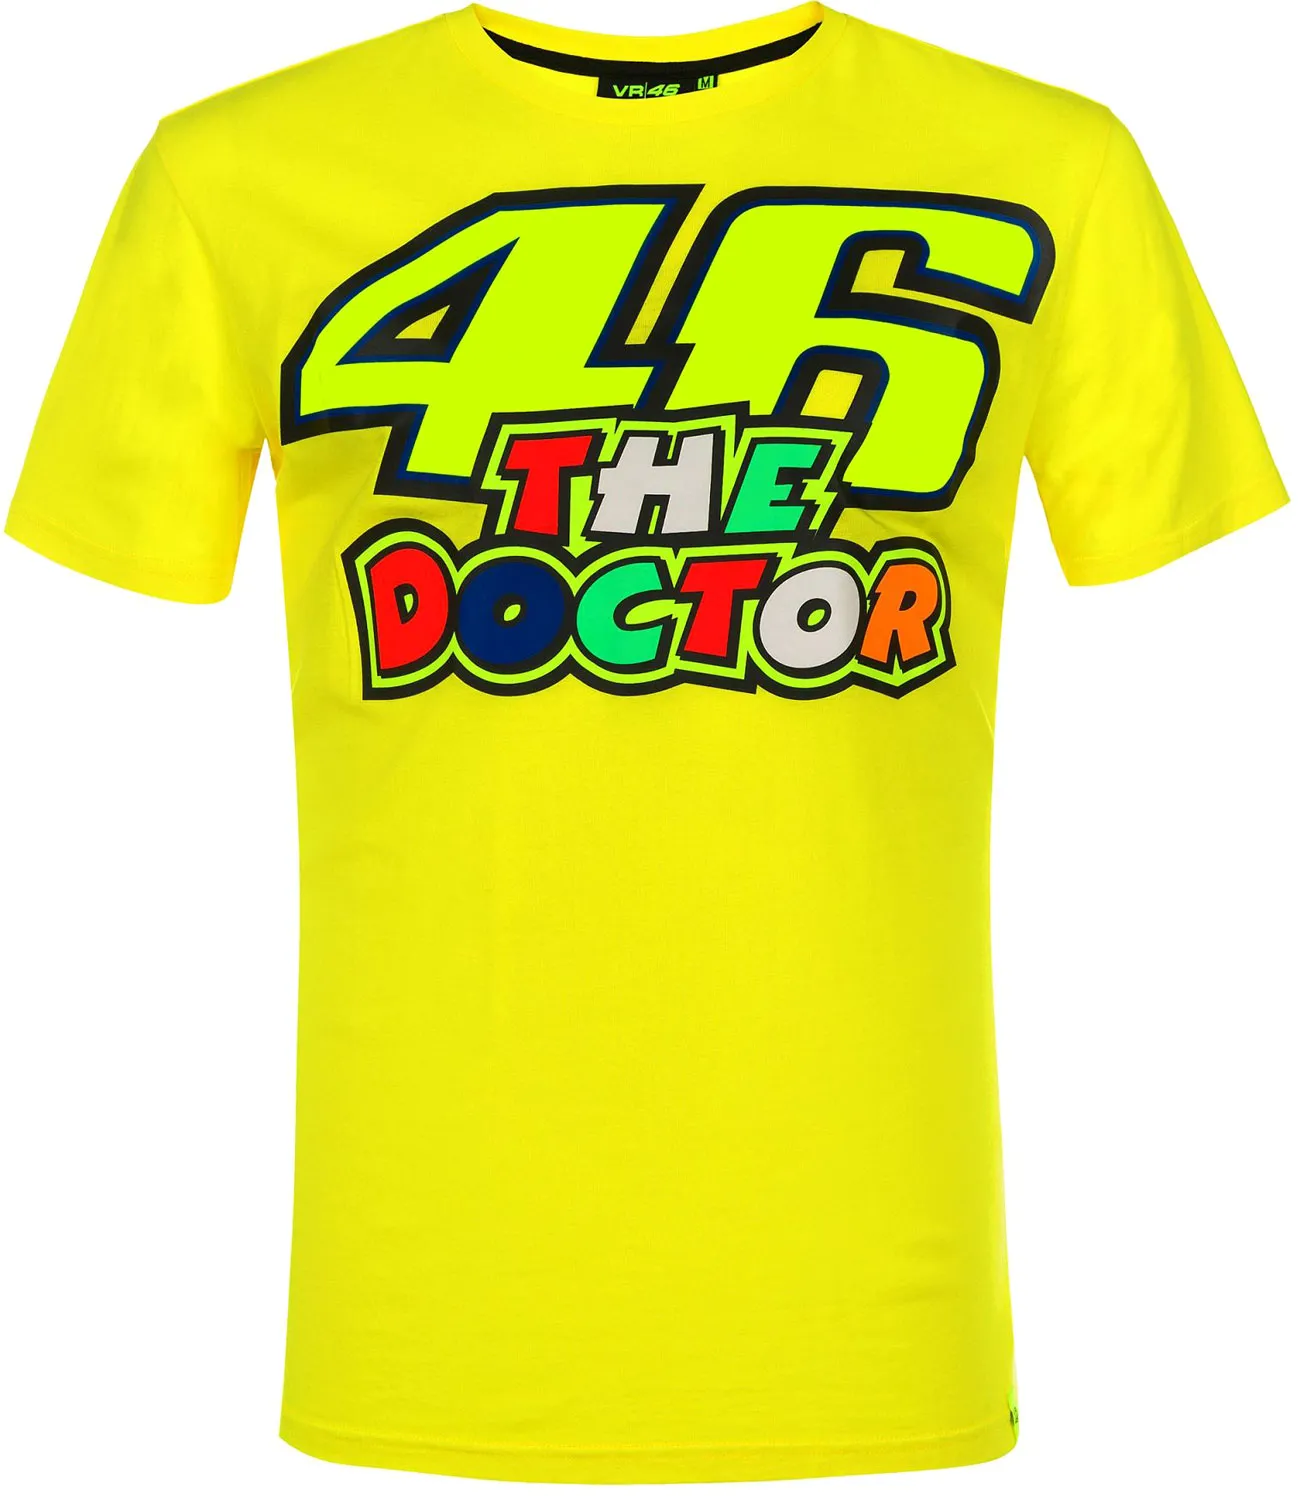 VR46 Racing Apparel 46 The Doctor, t-shirt - Jaune - S